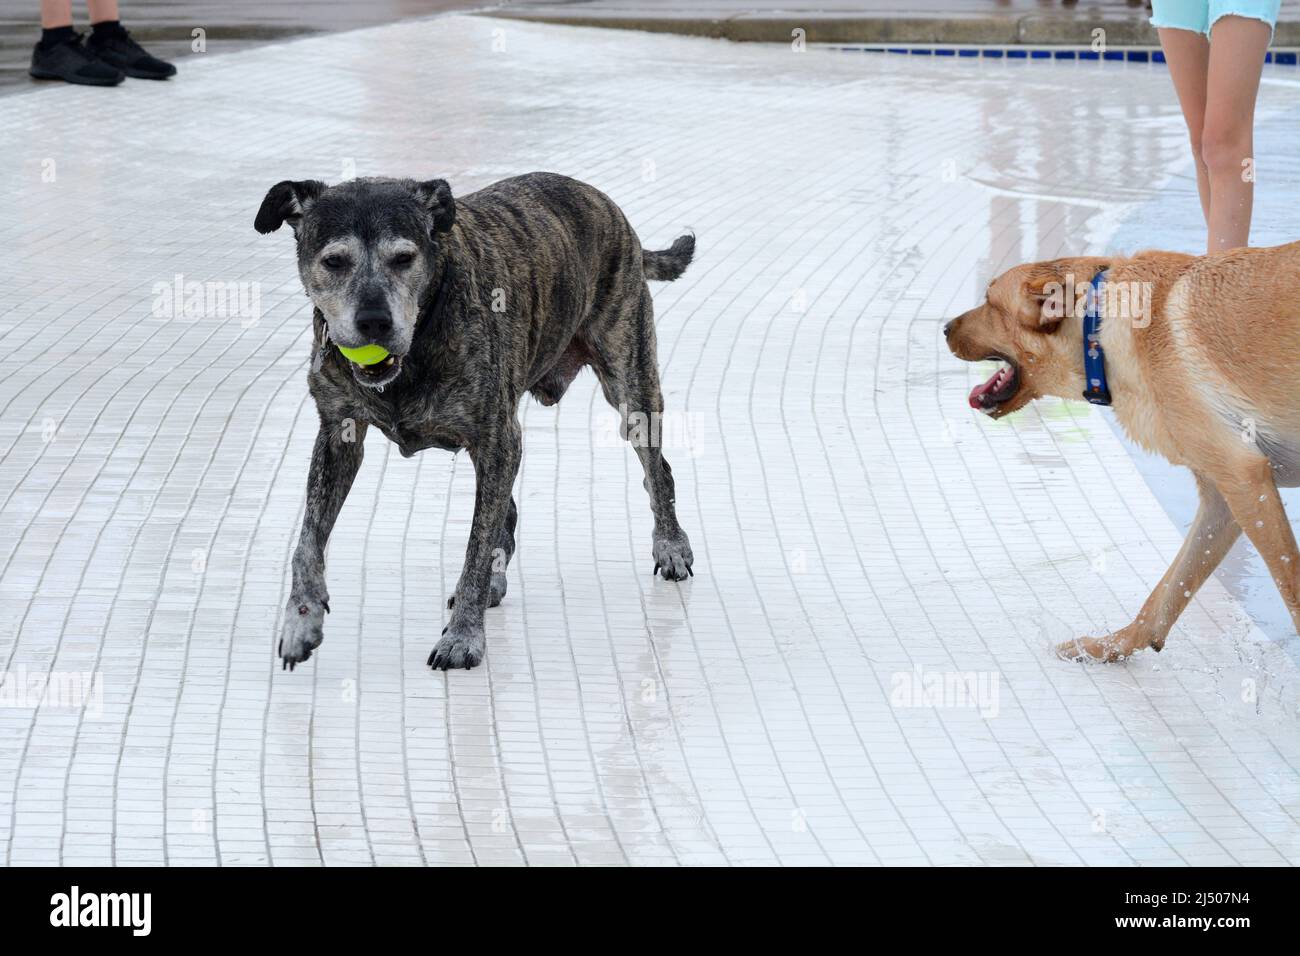 Younger enthusiastic dog approaching senior dog guarding tennis ball in mouth at swimming pool party Stock Photo